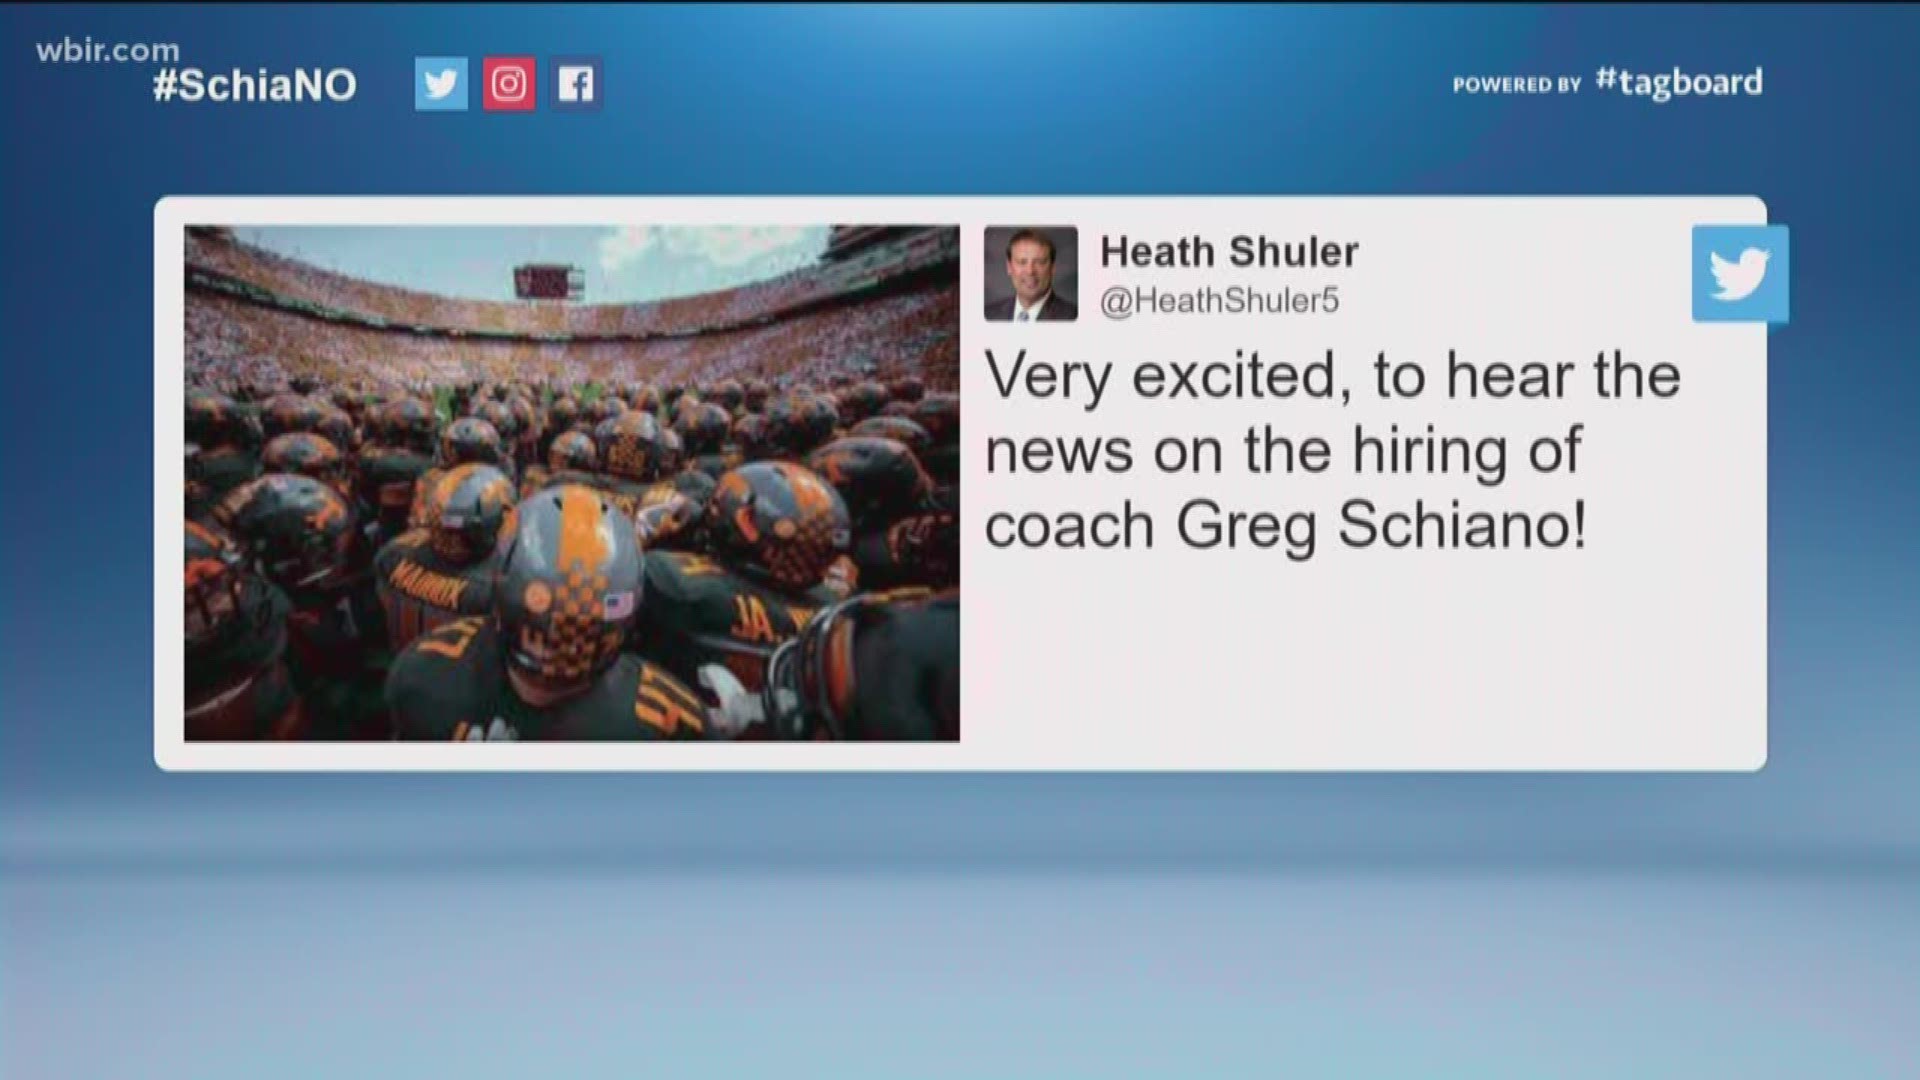 Greg Schiano's name is trending on Twitter, but those Tweets do not offer any positive feedback.